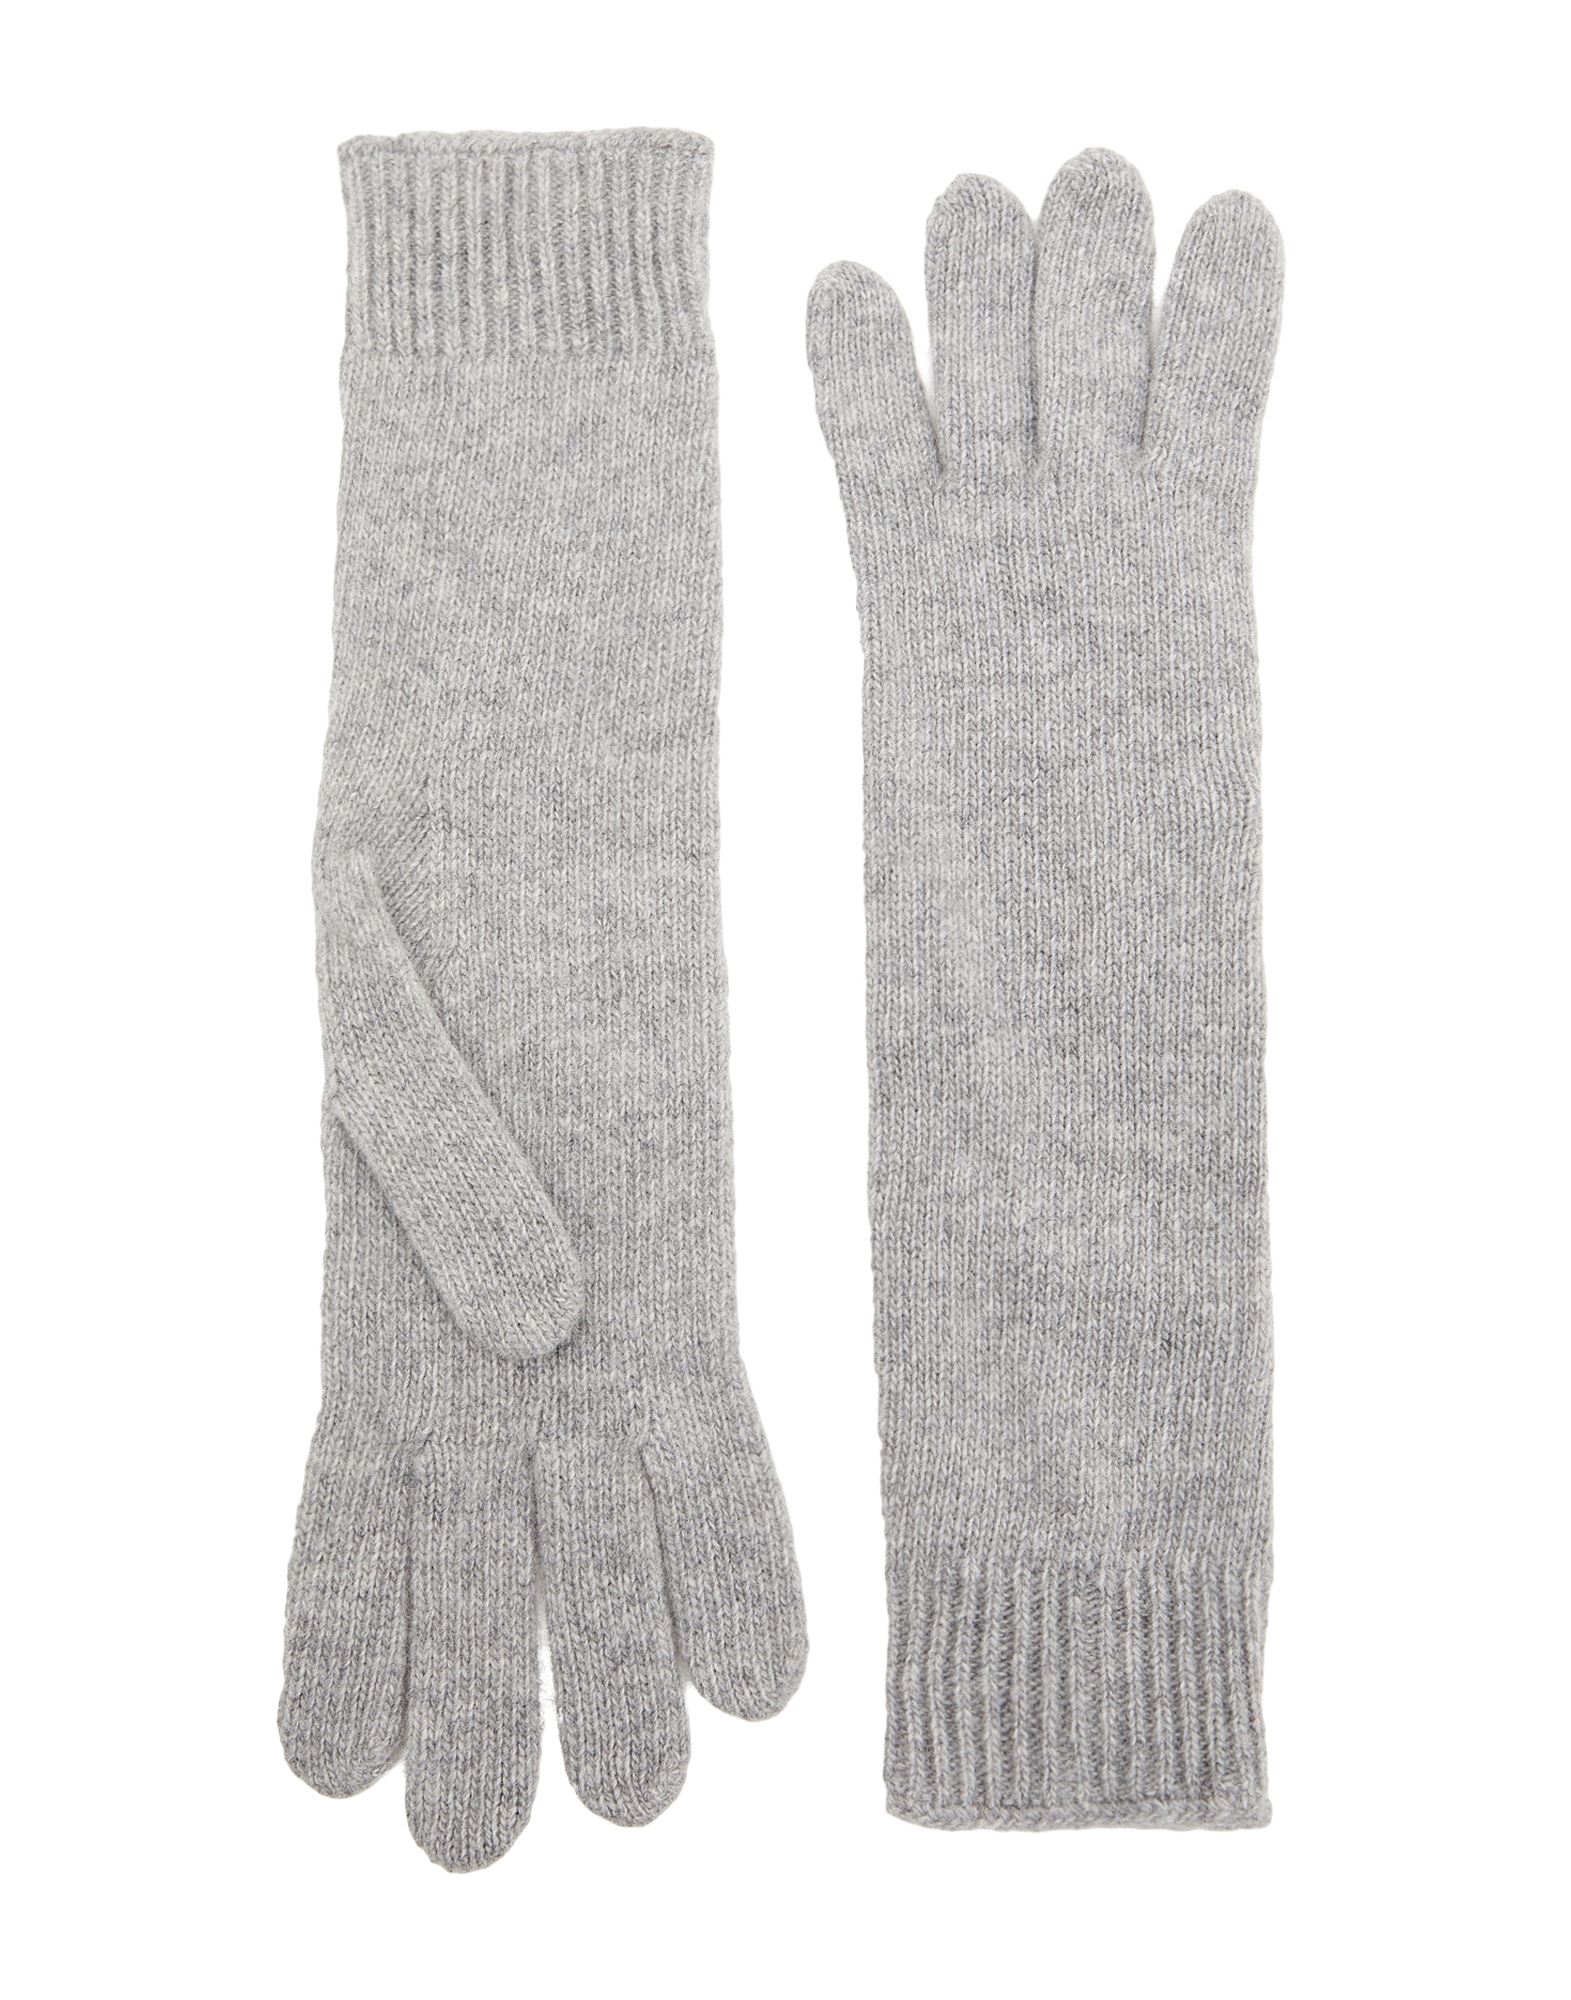 ԥ볫8 by YOOX ǥ  졼 one size ꥵ륦 100% RECYCLED EXTRAFINE WOOL KNIT EXTRA-LONG GLOVE